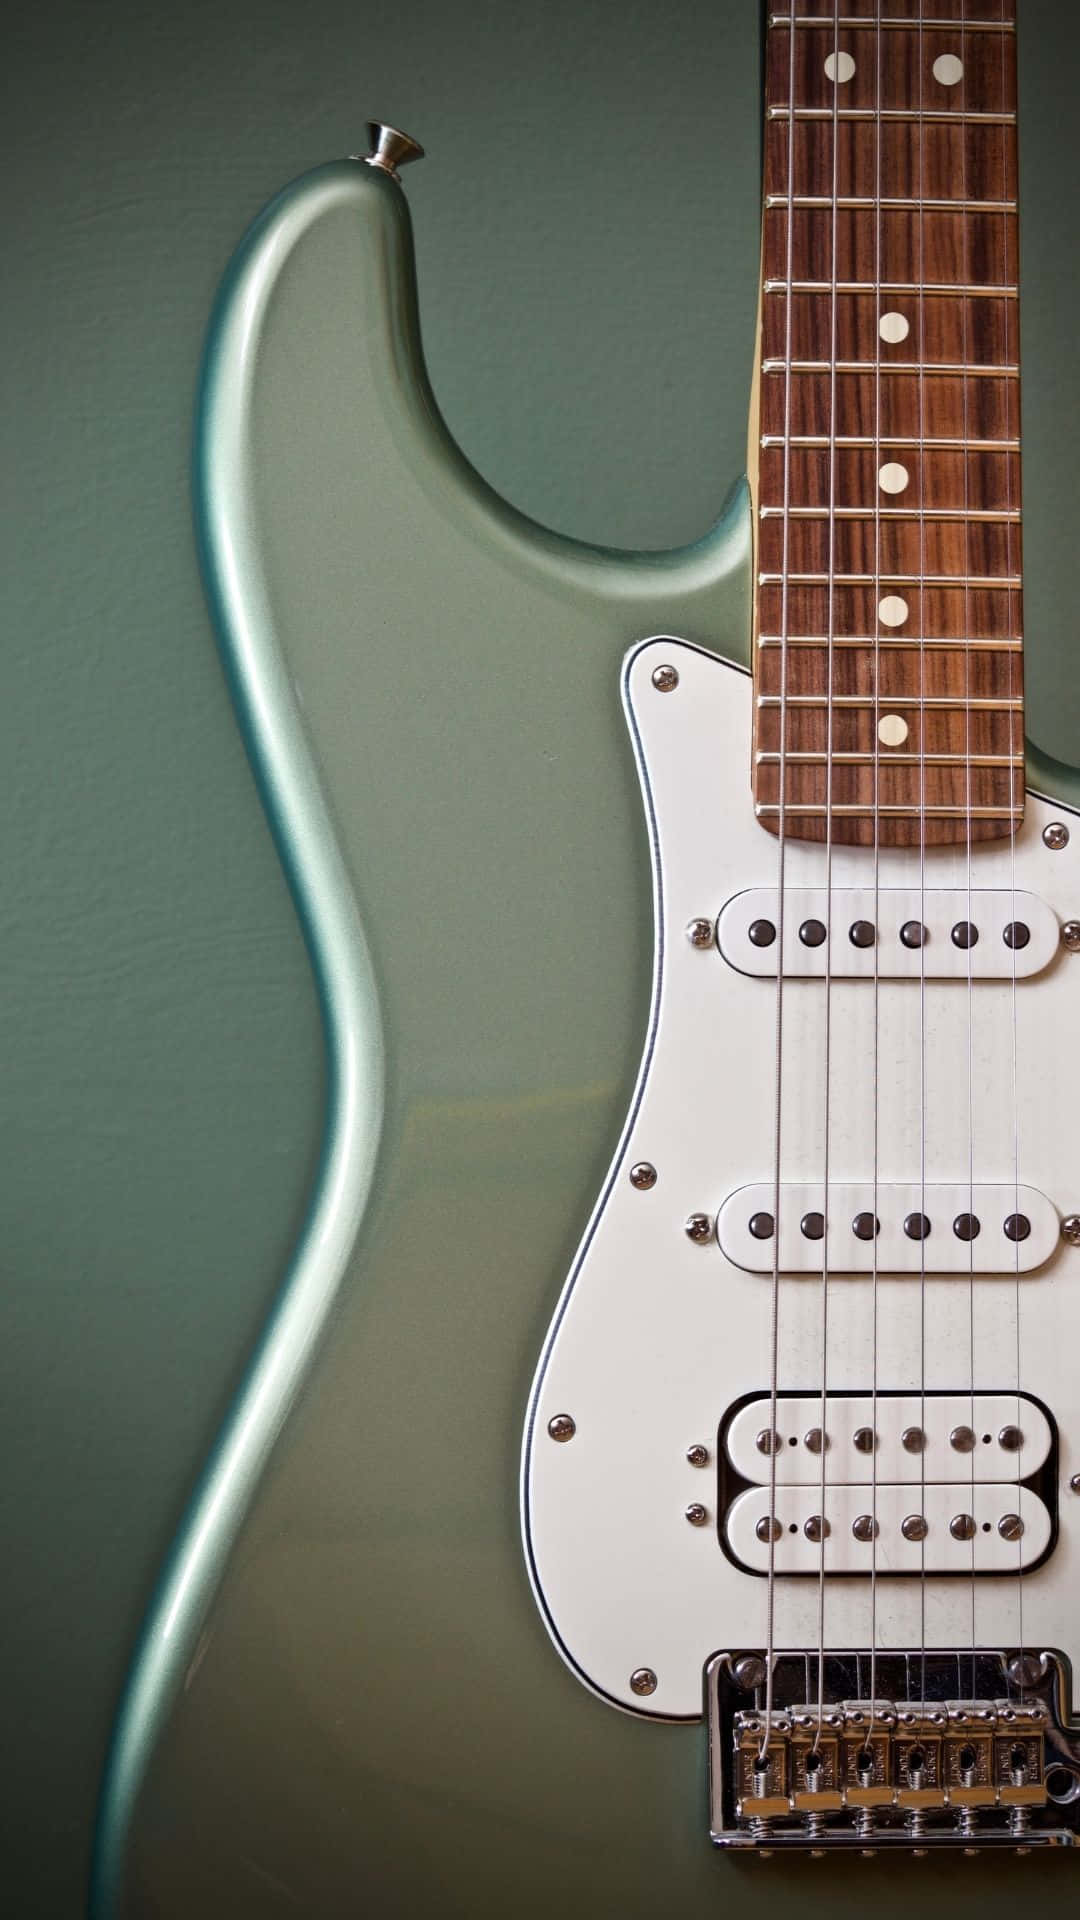 Make Sweet Music With A Stunningly Beautiful Guitar